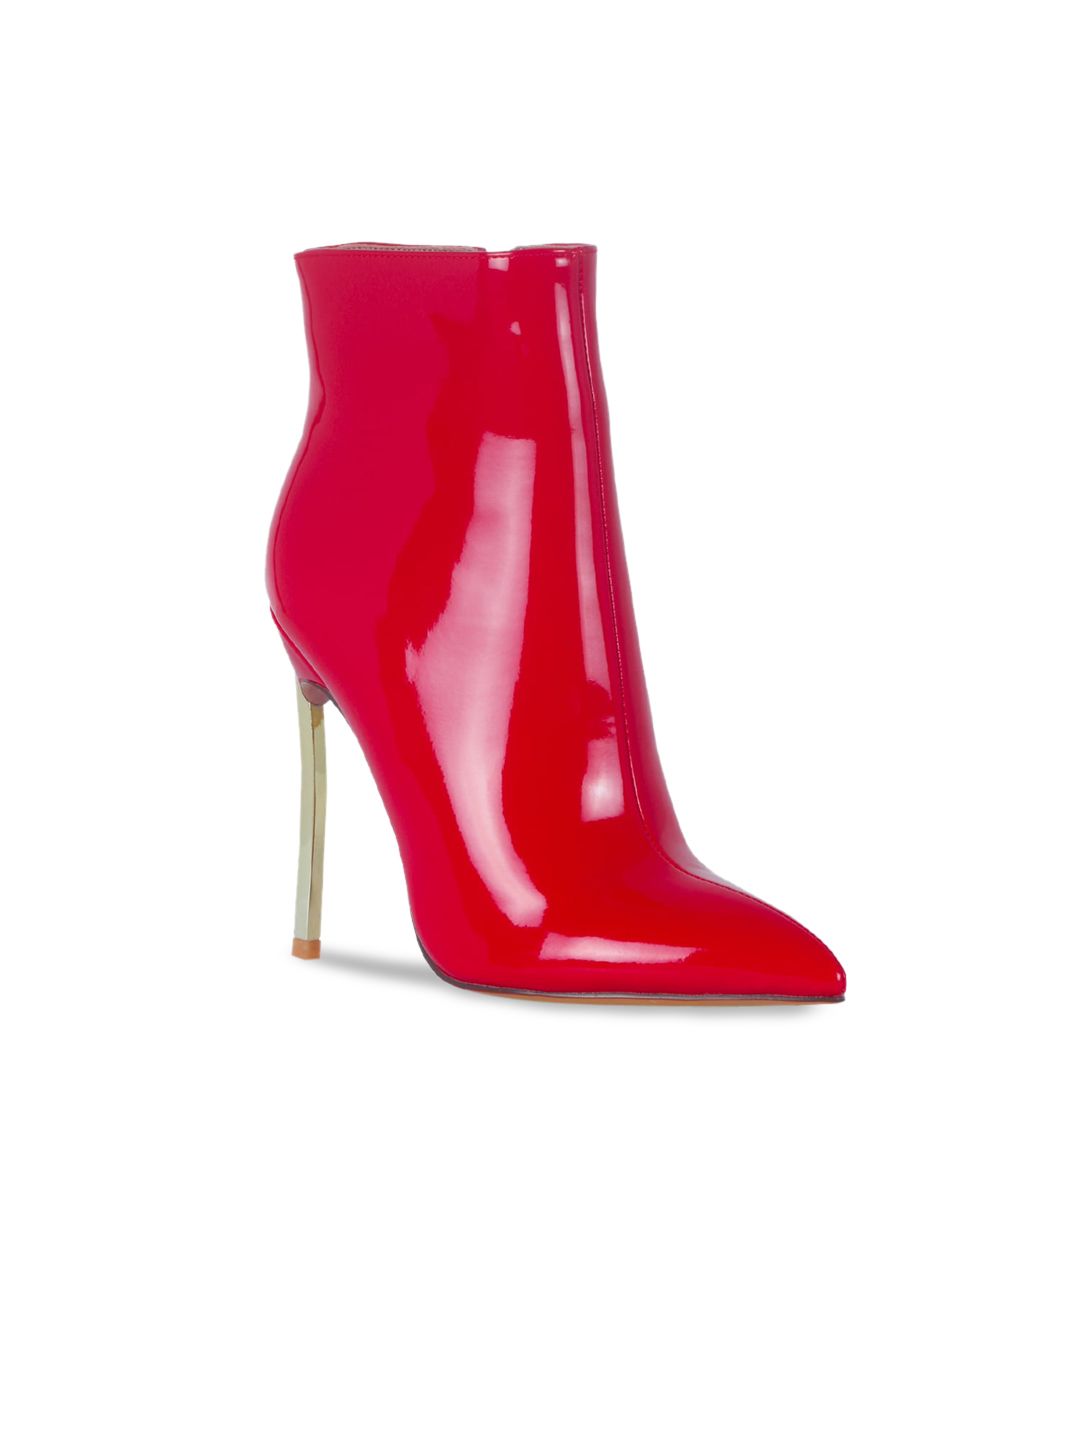 London Rag Red Party Stiletto Heeled Boots Price in India